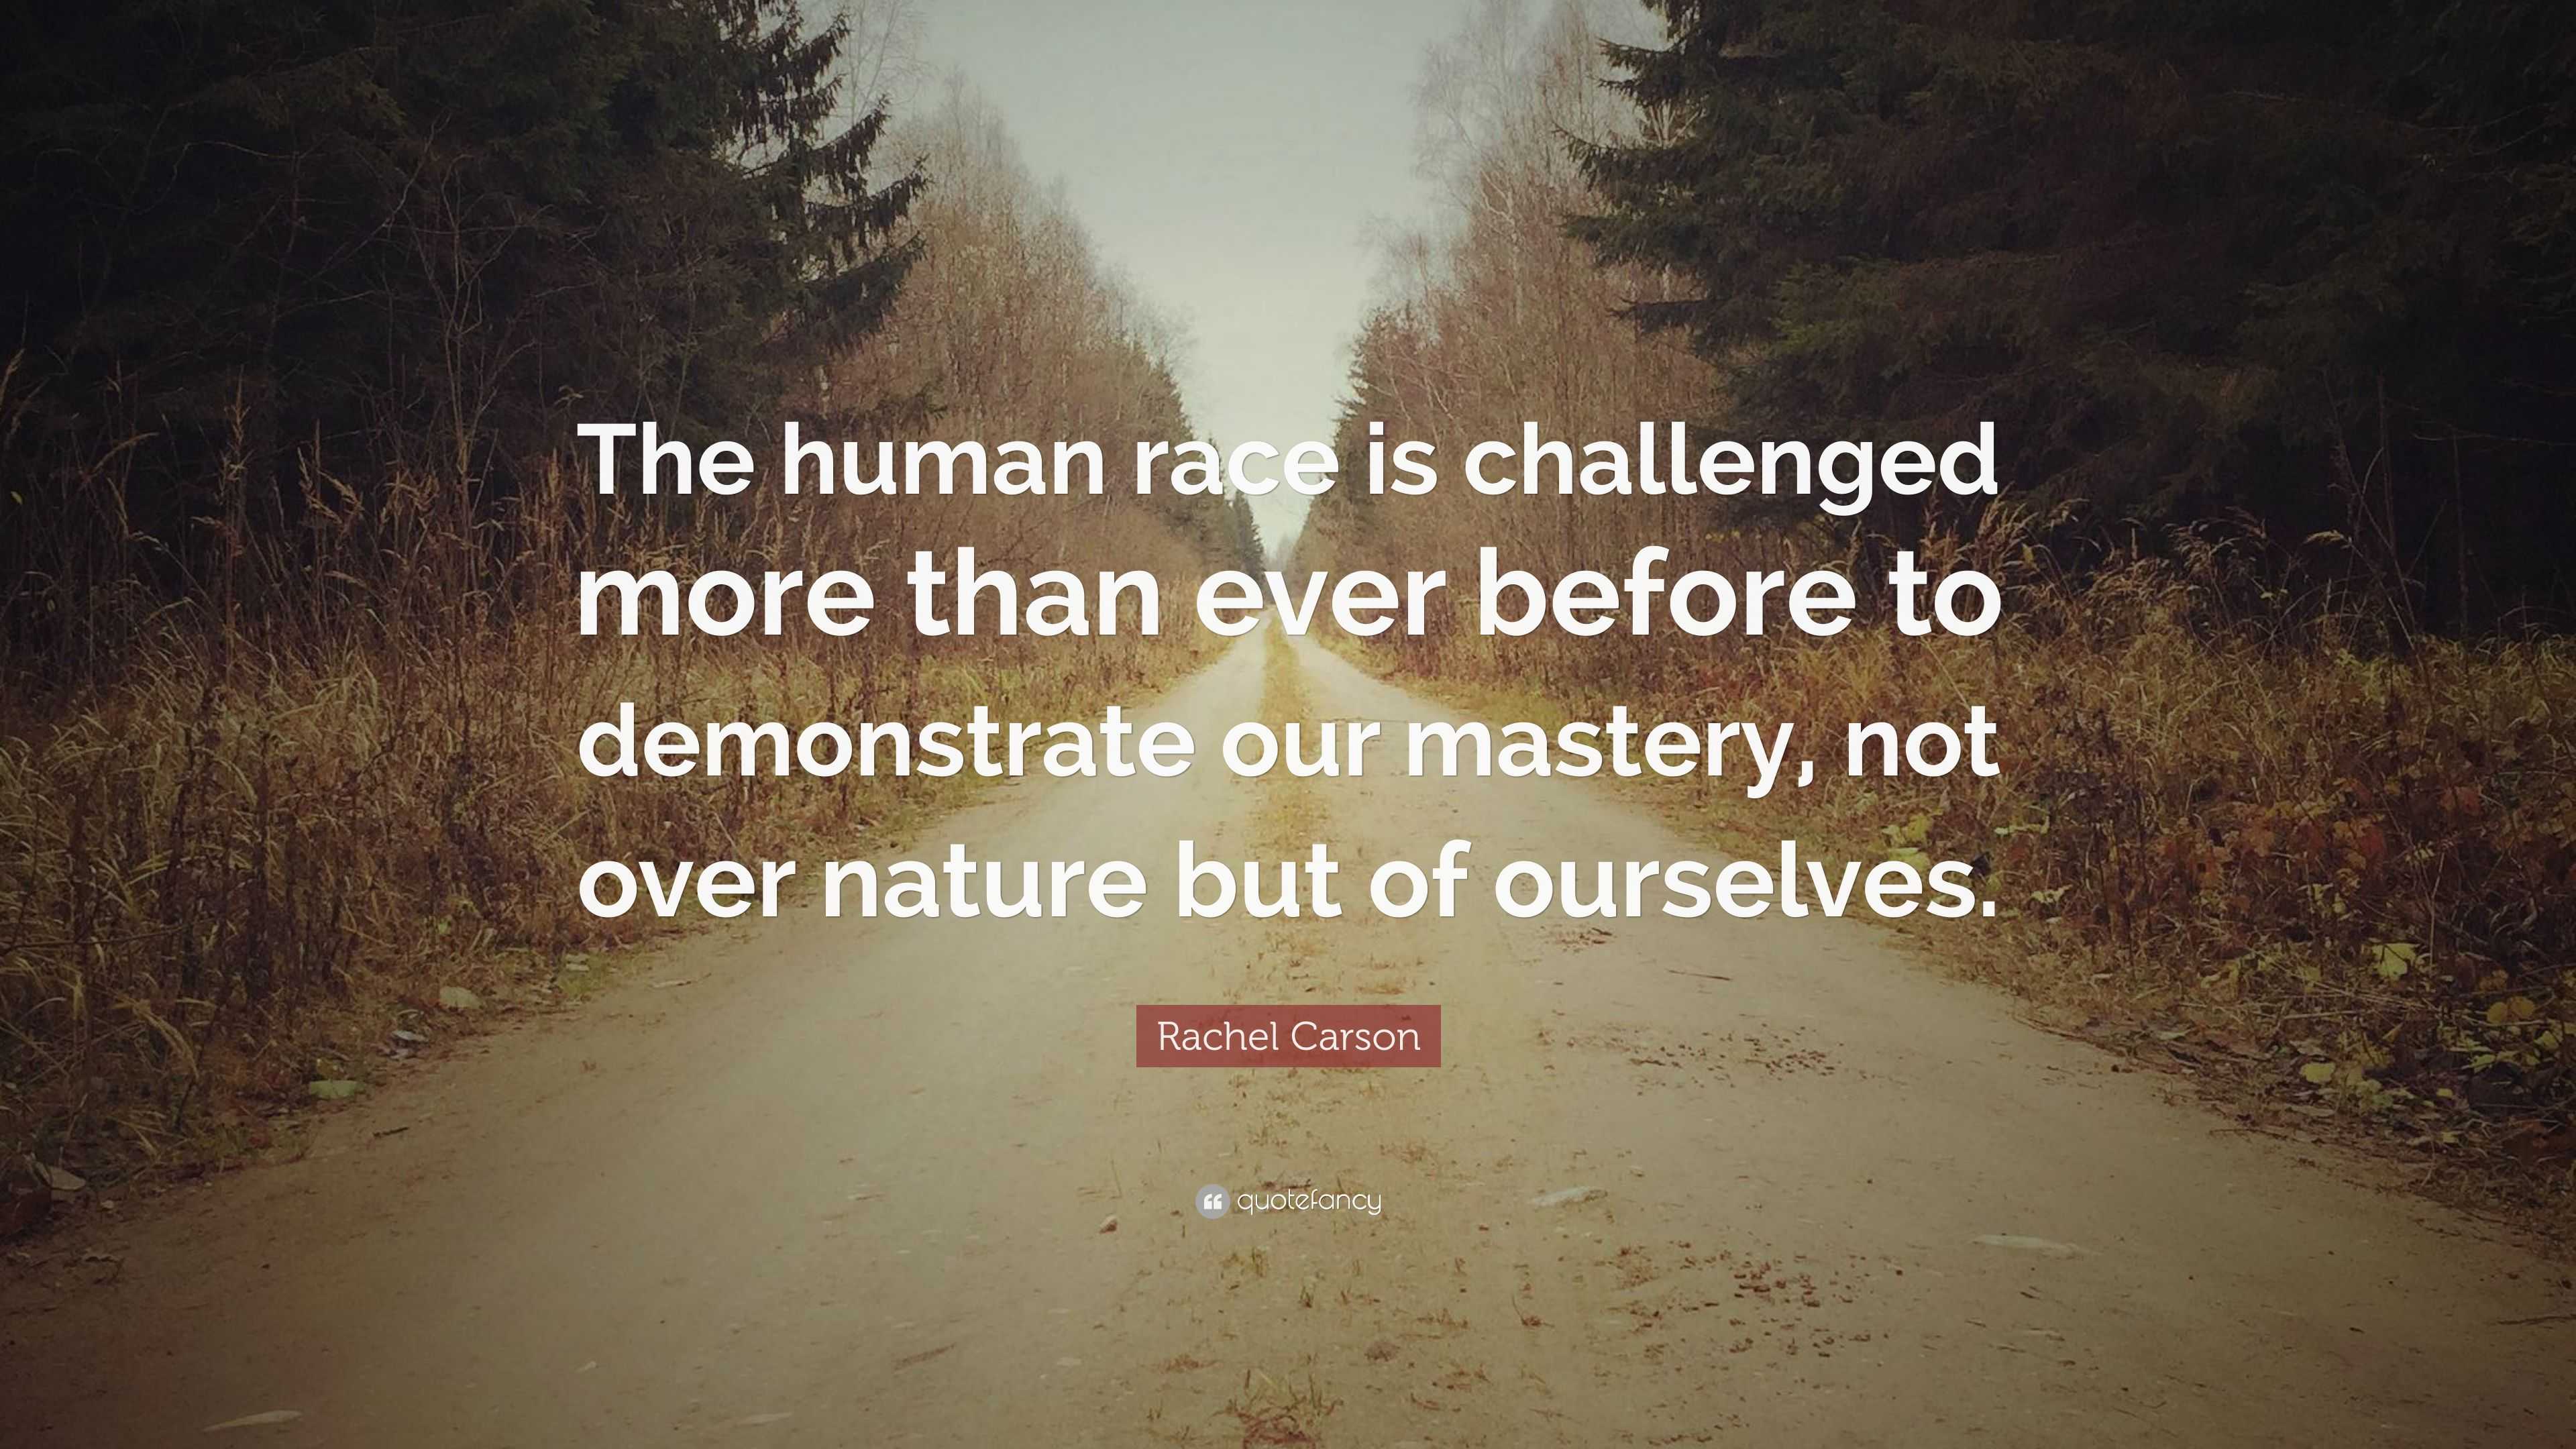 Rachel Carson Quote: “The human race is challenged more than ever ...